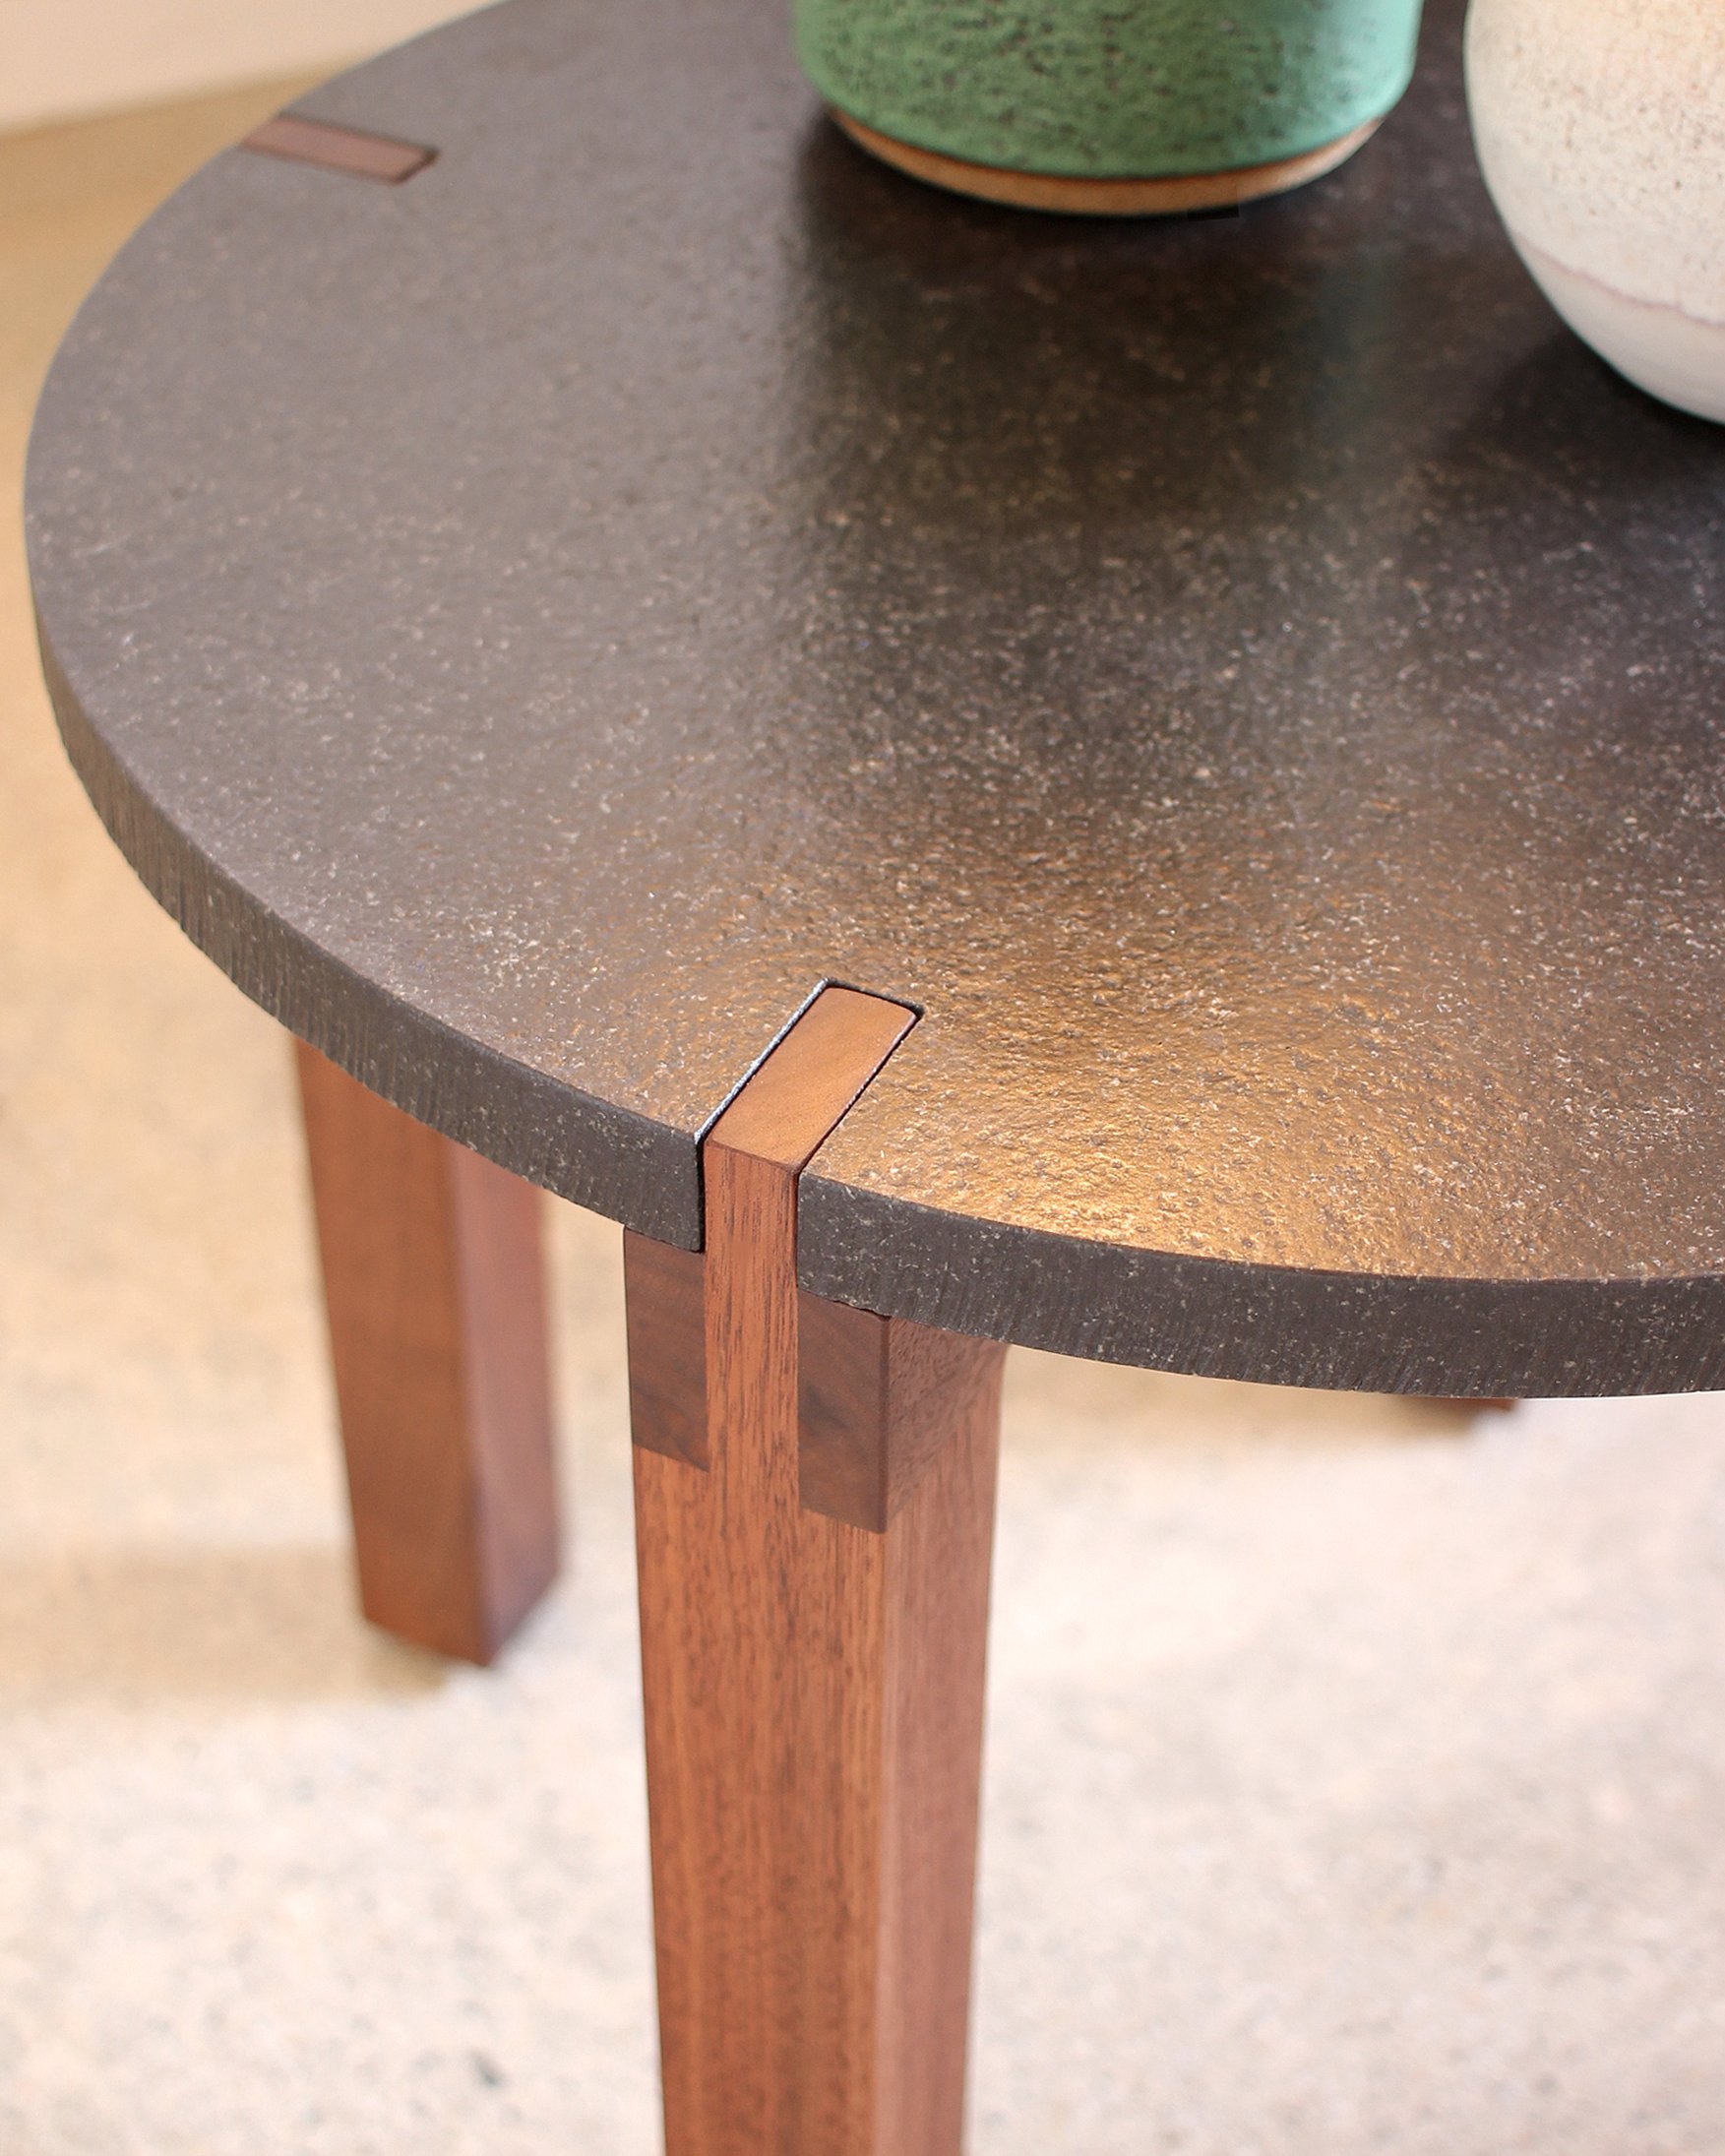 ROUND SIDE TABLE detail 10202019.jpg